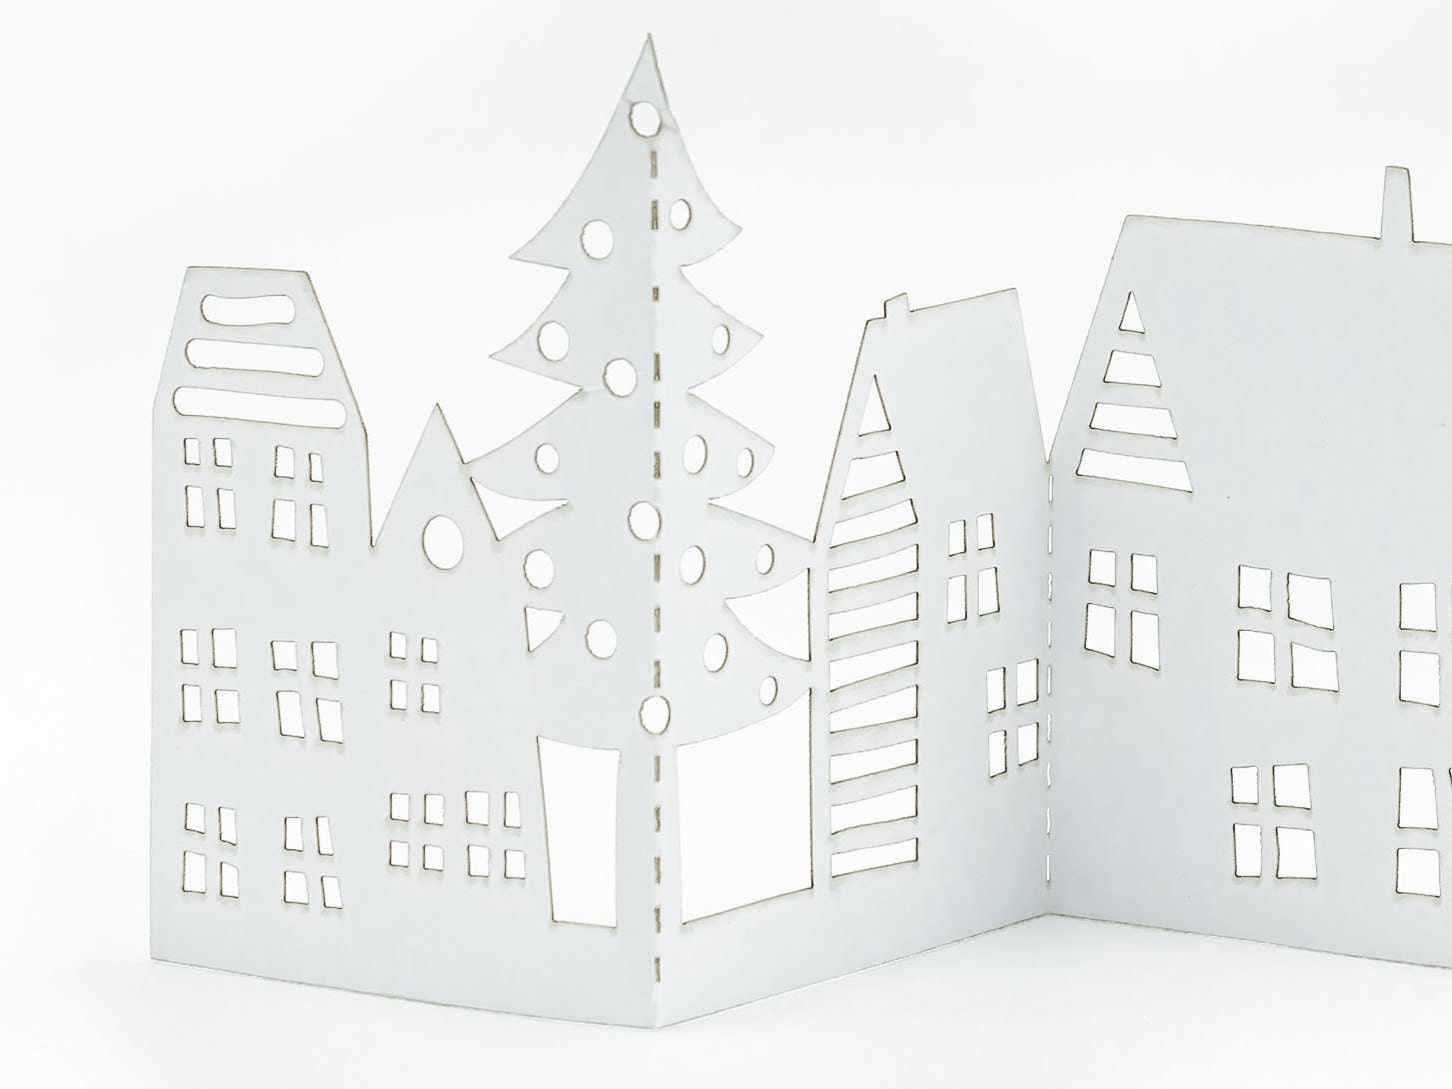 Mini Christmas Village Pop Up Card | 3D Winter Village Greeting | Tiny Festive Holiday Decor | Cozy Greeting Card | Unique Holiday Gift